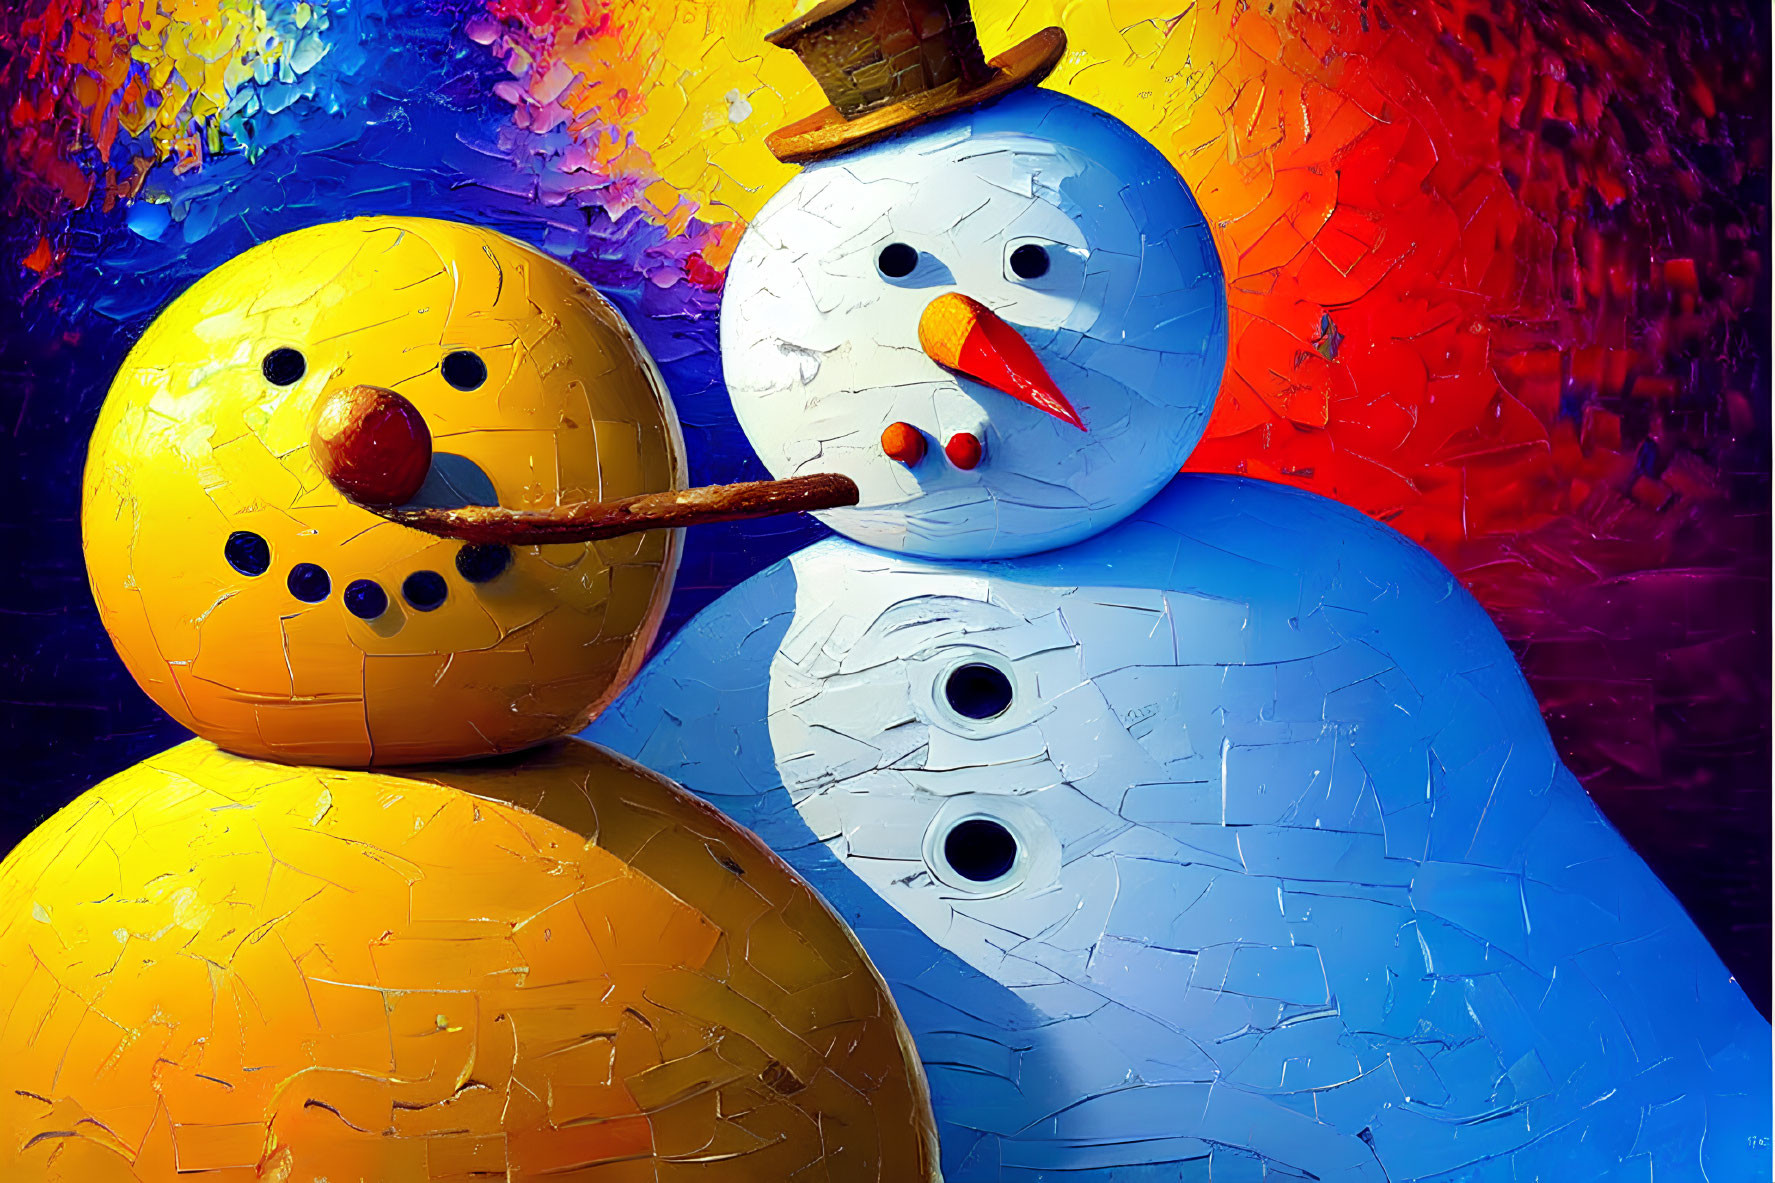 Colorful Textured Snowmen with Carrot Noses and Hats on Vibrant Background